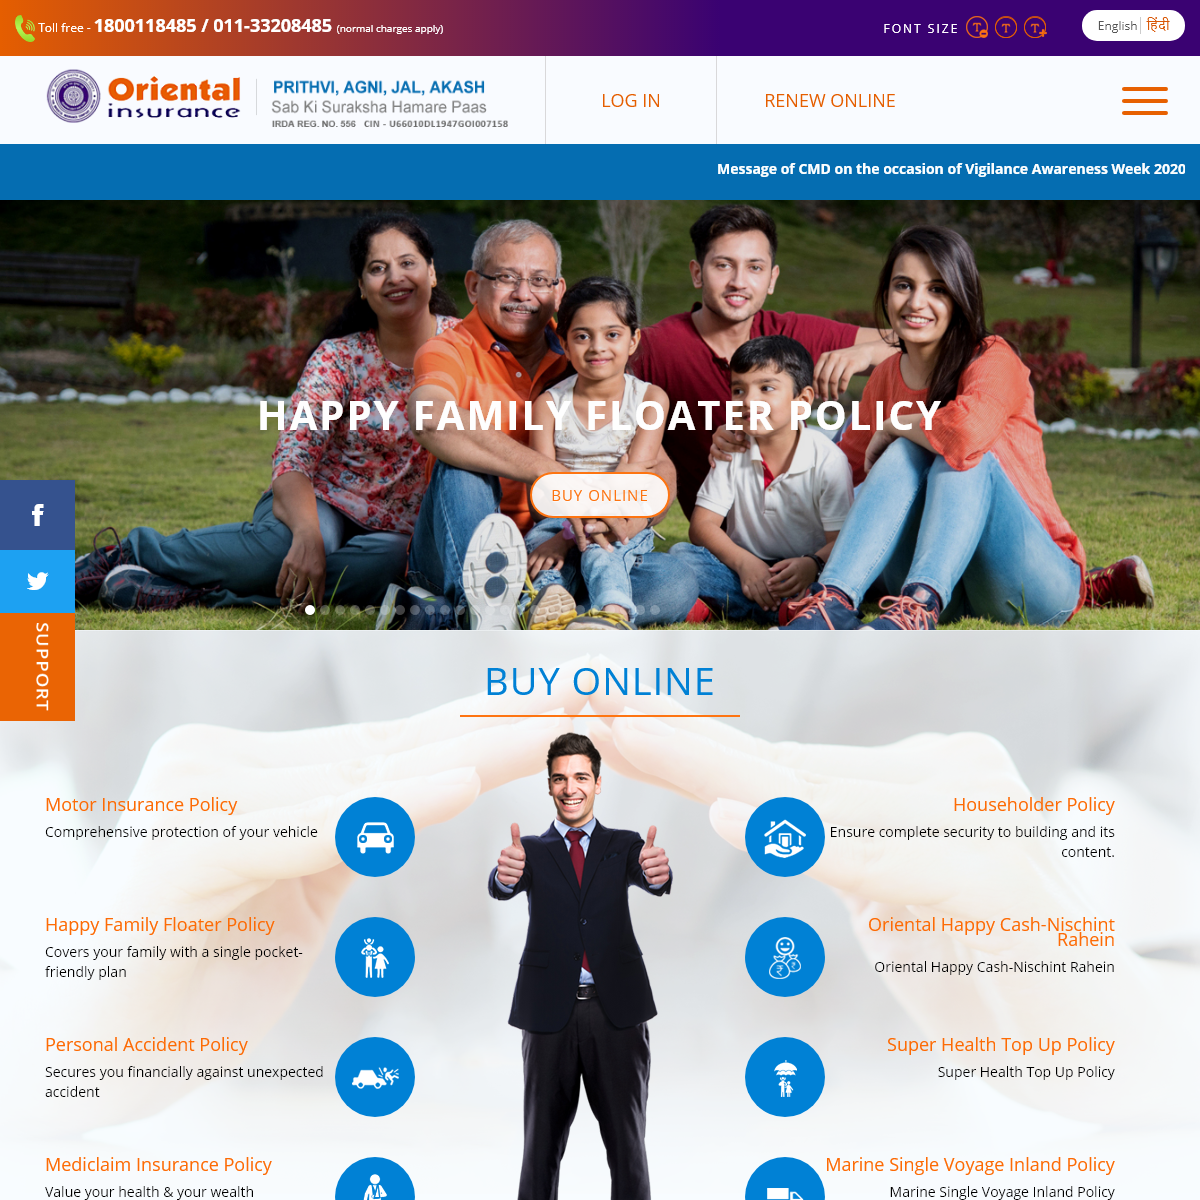 A complete backup of orientalinsurance.org.in